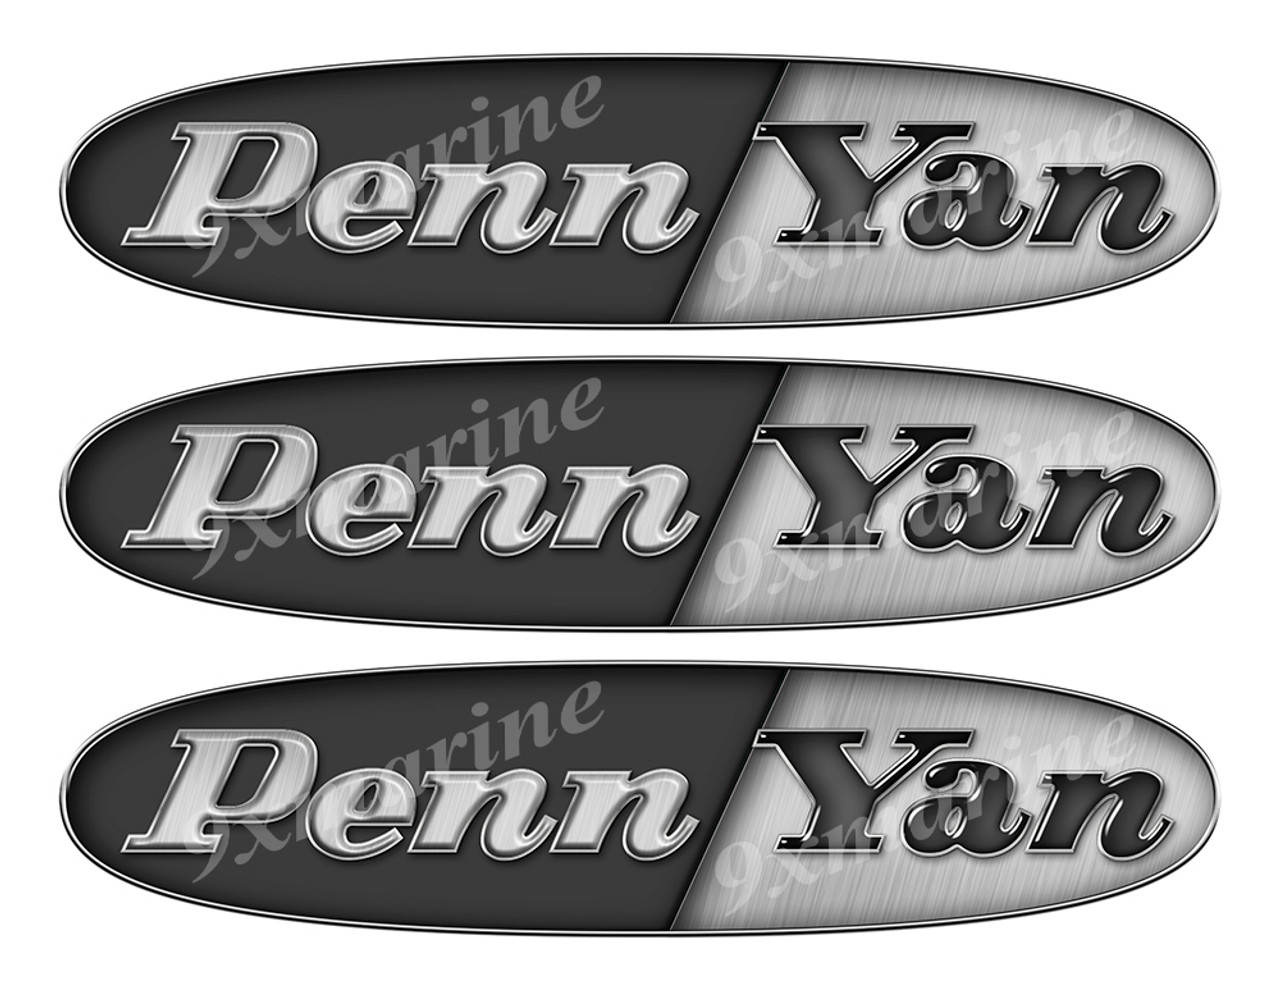 3 Penn Yan Boats Vintage Stickers Remastered 10"x2.5"